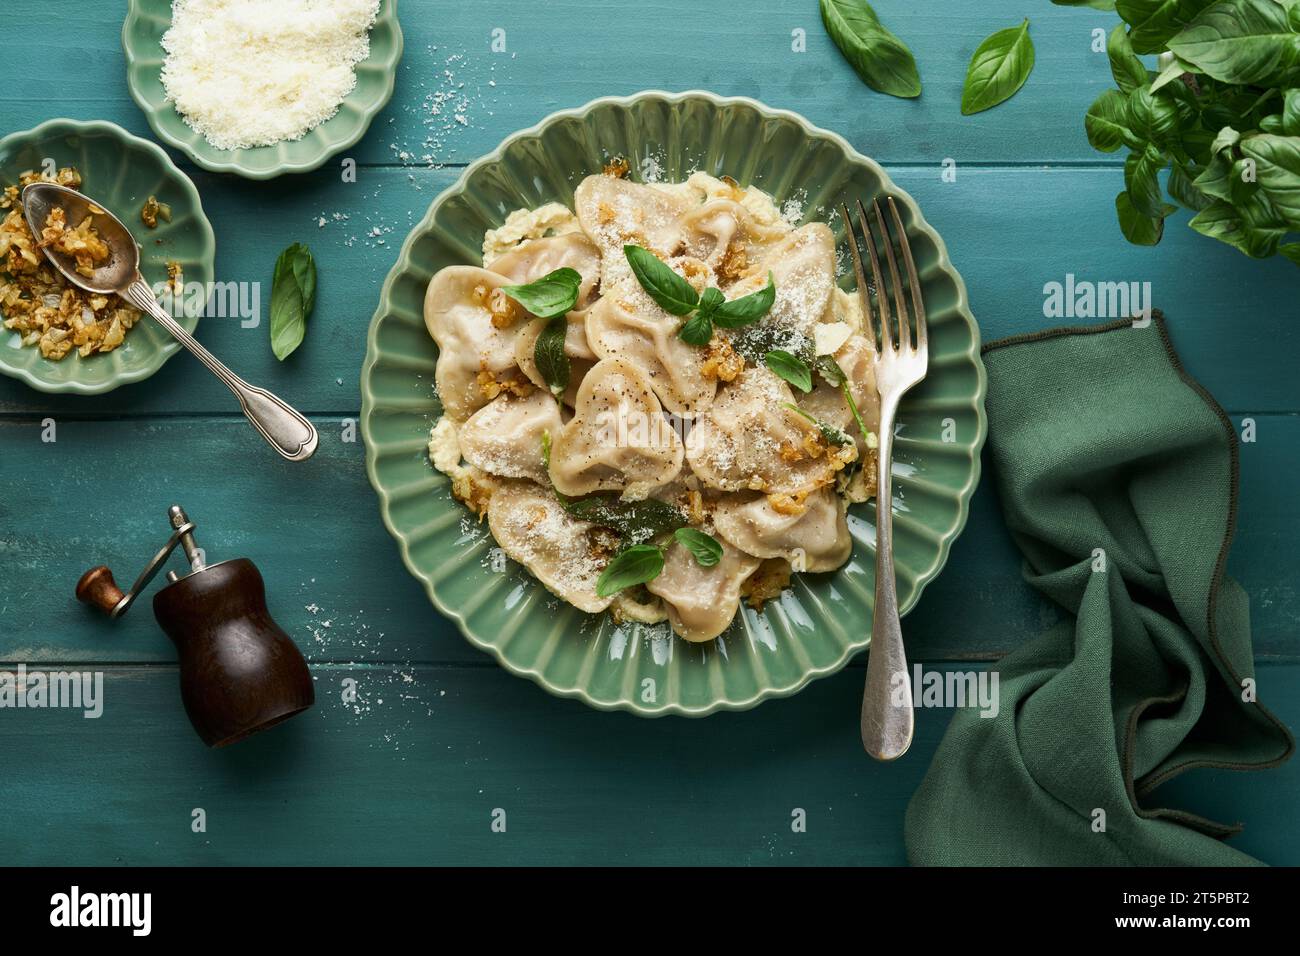 Homemade italian ravioli pasta in heart shape with beef meat, cheese sauce, caramelized onions, basil and saffron on old wooden blue background. Food Stock Photo